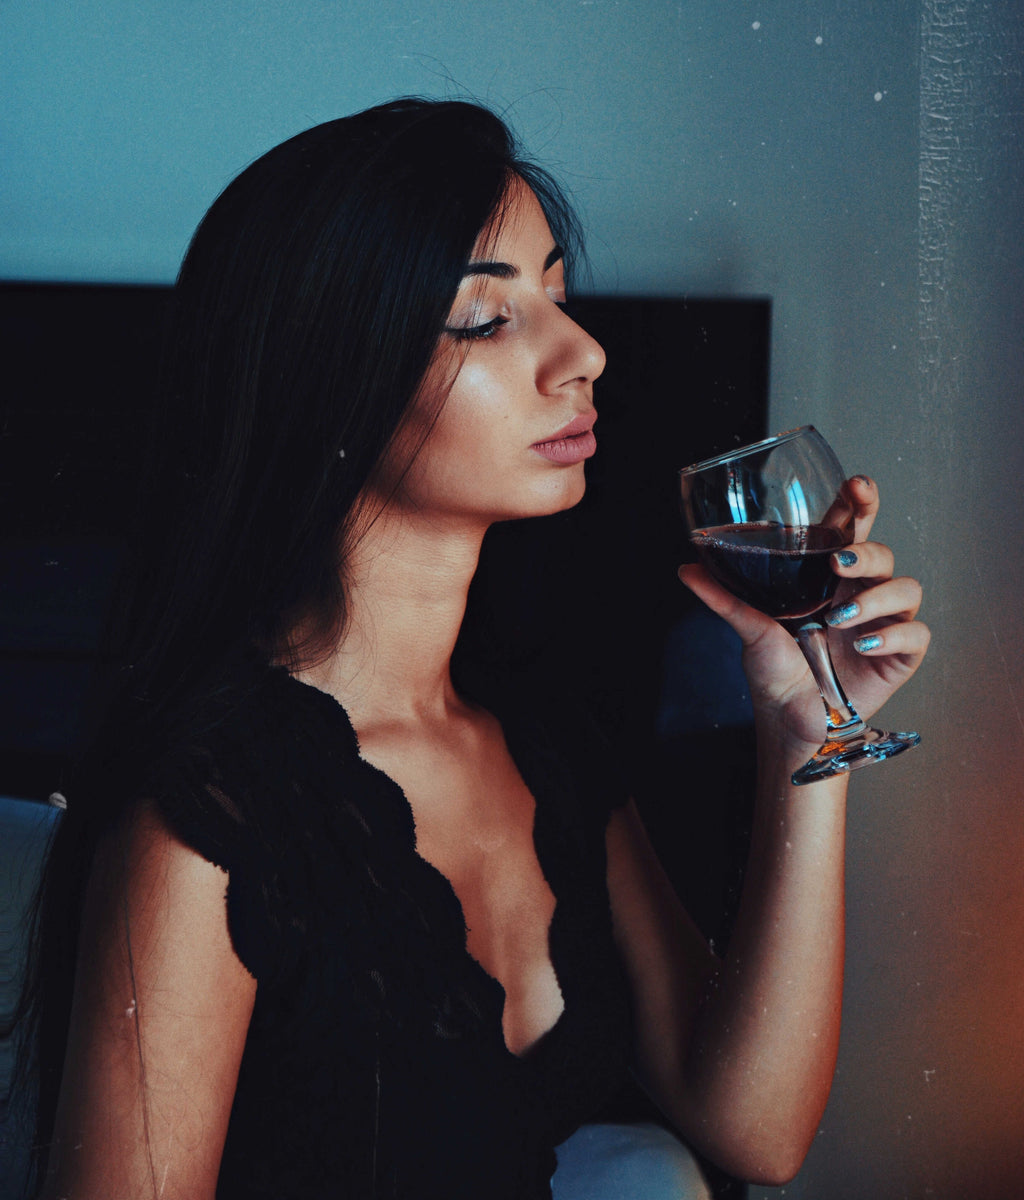 Woman evaluating and observing wine before tasting it.